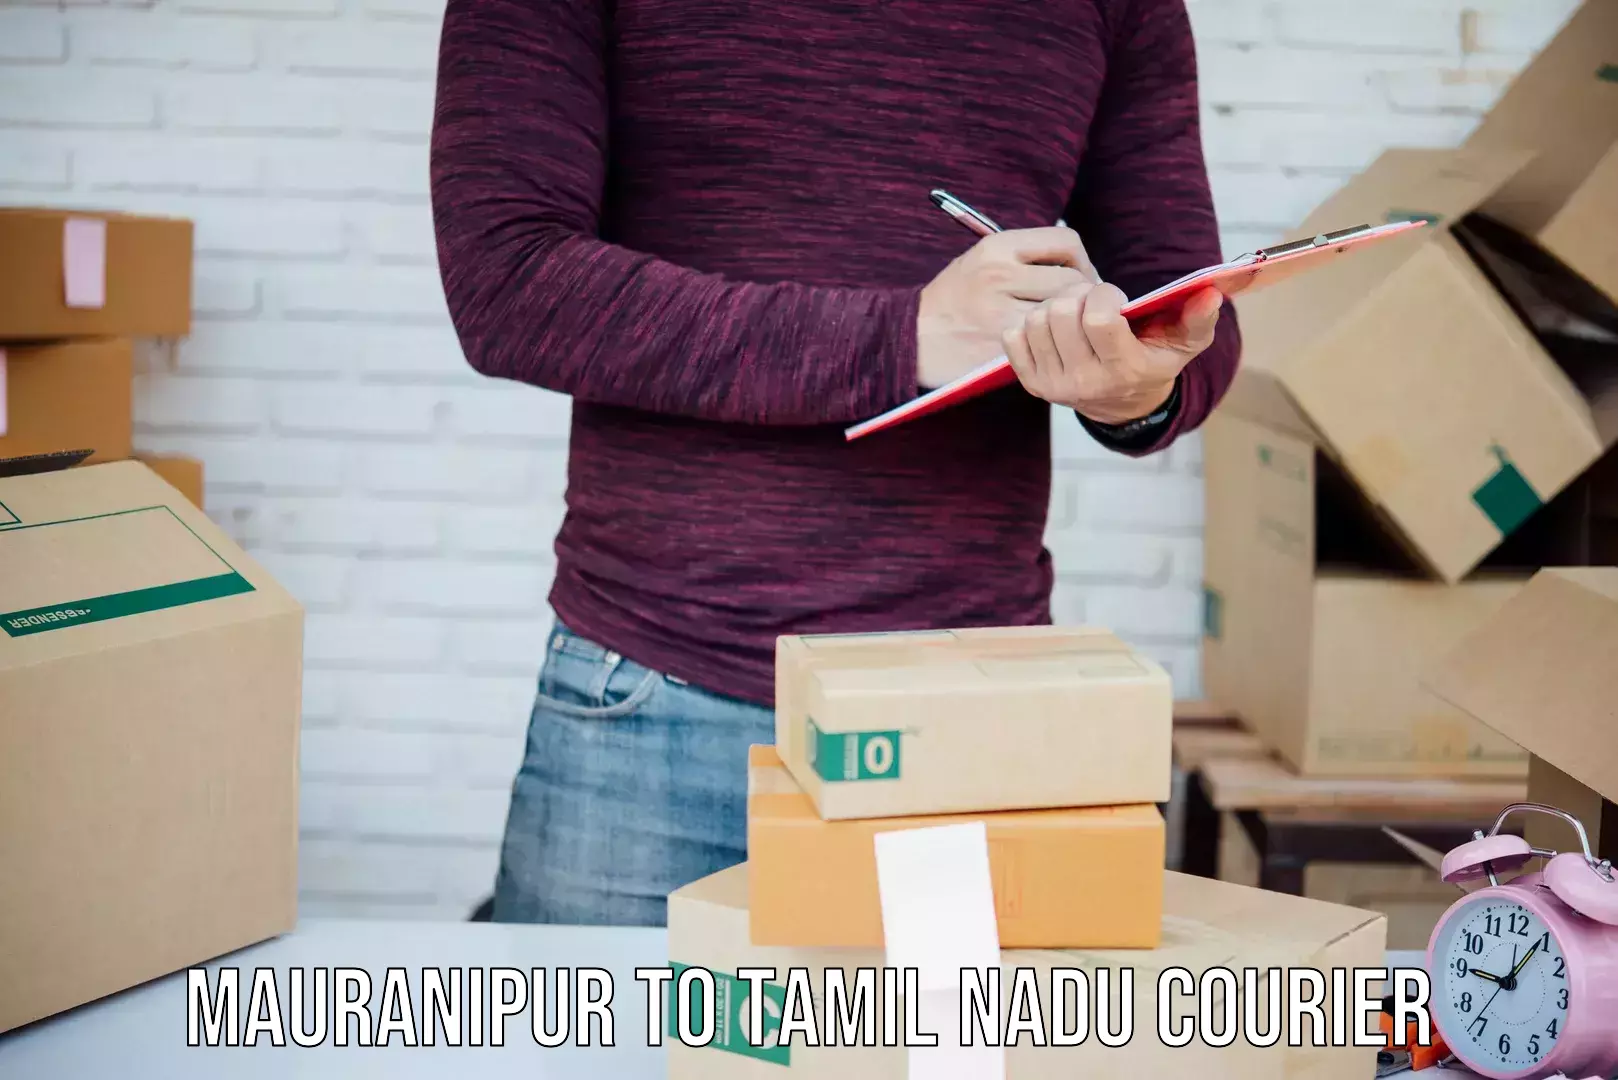 Automated parcel services Mauranipur to Tiruchengodu